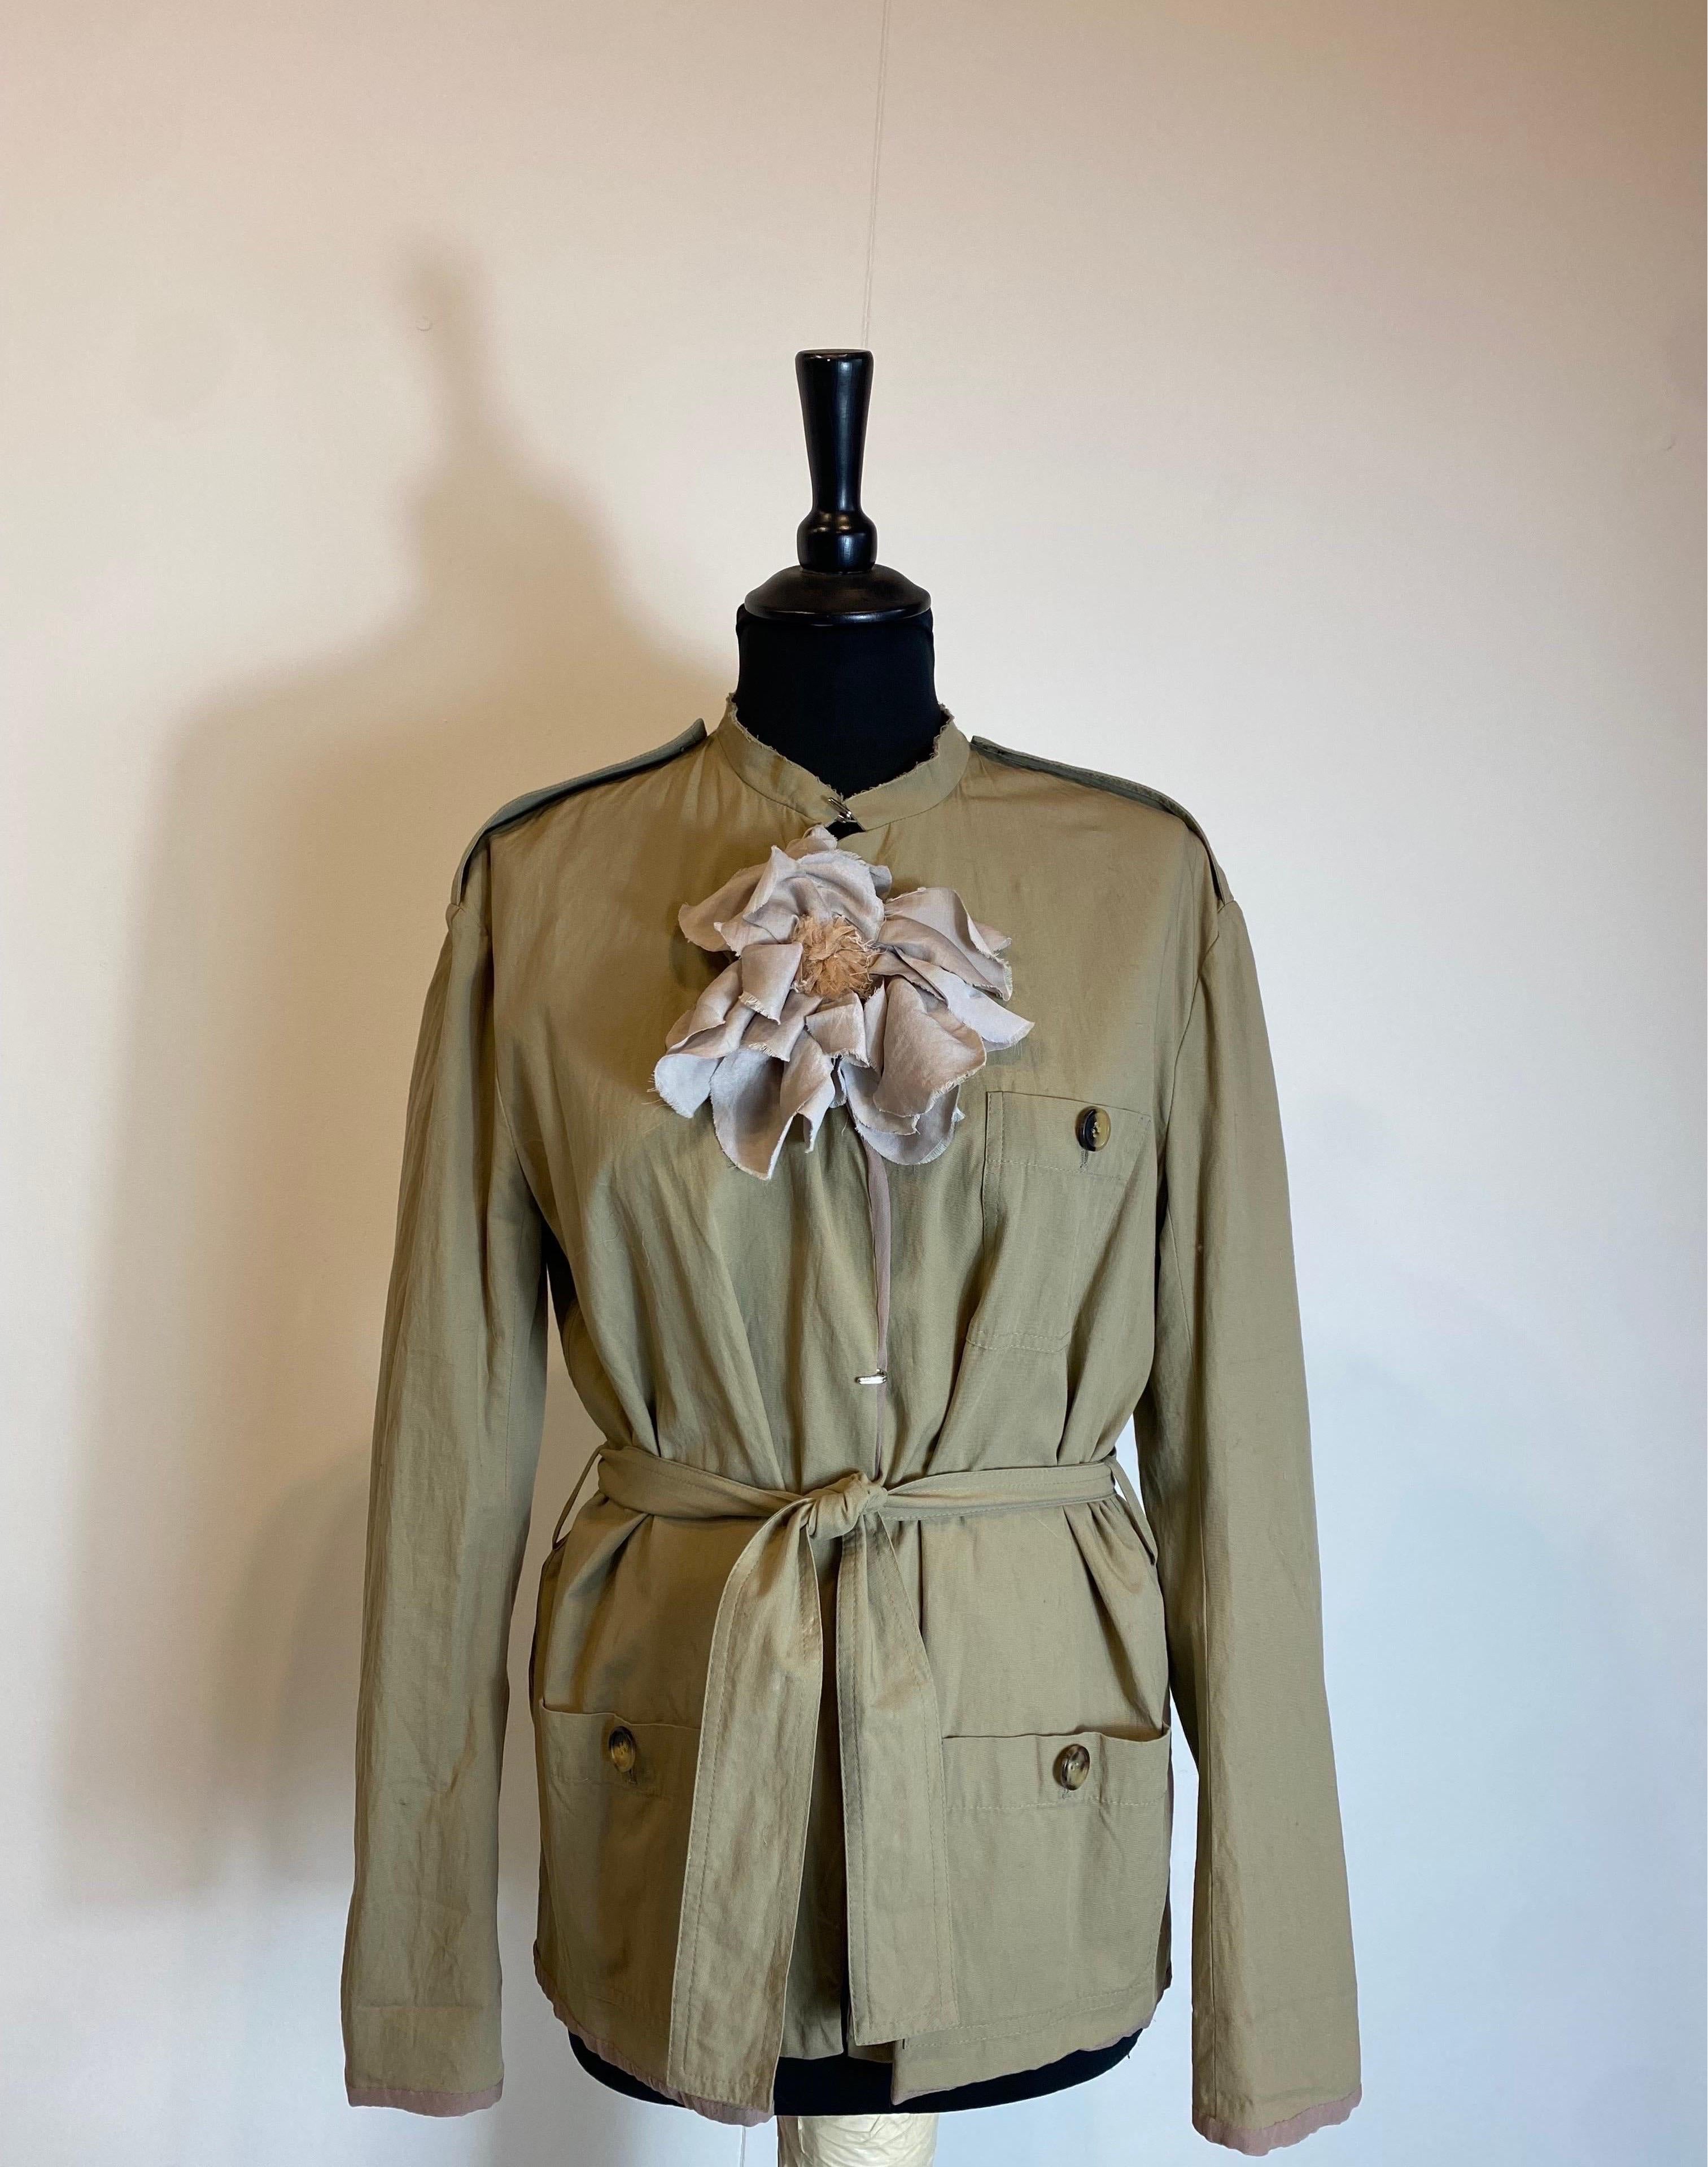 Lanvin blazer.
Summer 2011 collection.
Made of cotton. Silk lined.
Hook closure.
The size label is missing. 
It fits an Italian 42/44.
Shoulders 44 cm
Bust 52 cm
Length 70 cm
Sleeve 60 cm
In good general condition, with signs of normal use and some